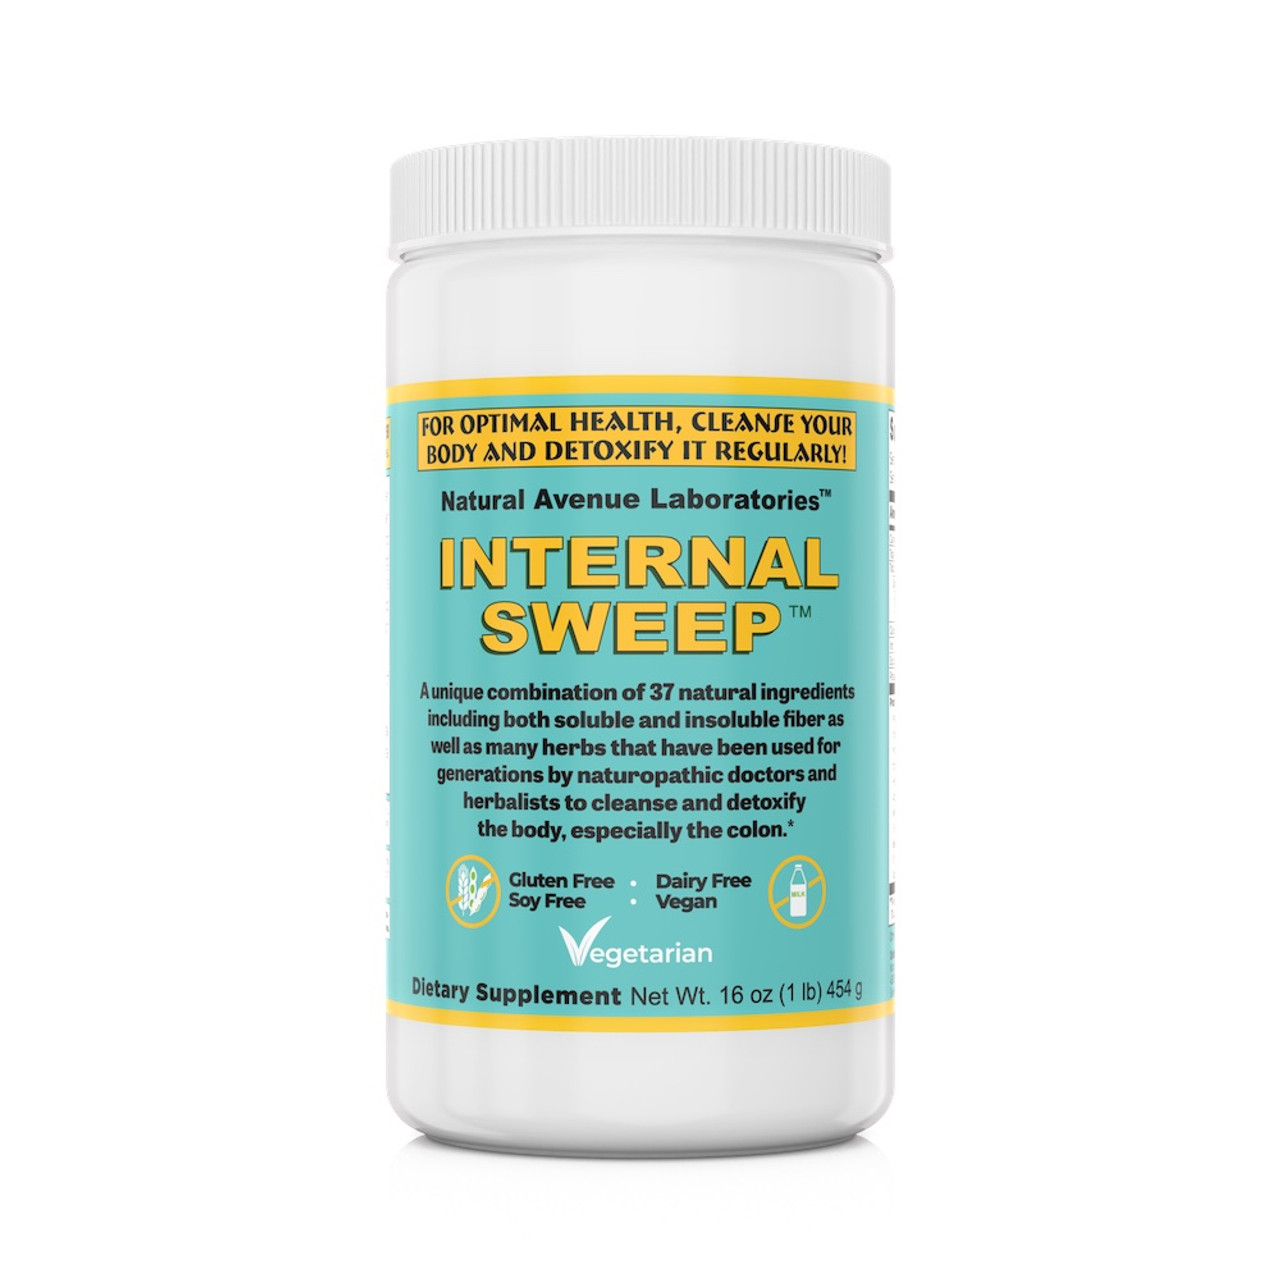 Internal Sweep is one of the best colon cleansing products on the market for the last 25 years! It contains the most effective and powerful internal cleansing ingredients. Including beneficial fibers from a wide variety of plant sources, acting on different parts of your digestive tract to provide the health benefits you deserve.